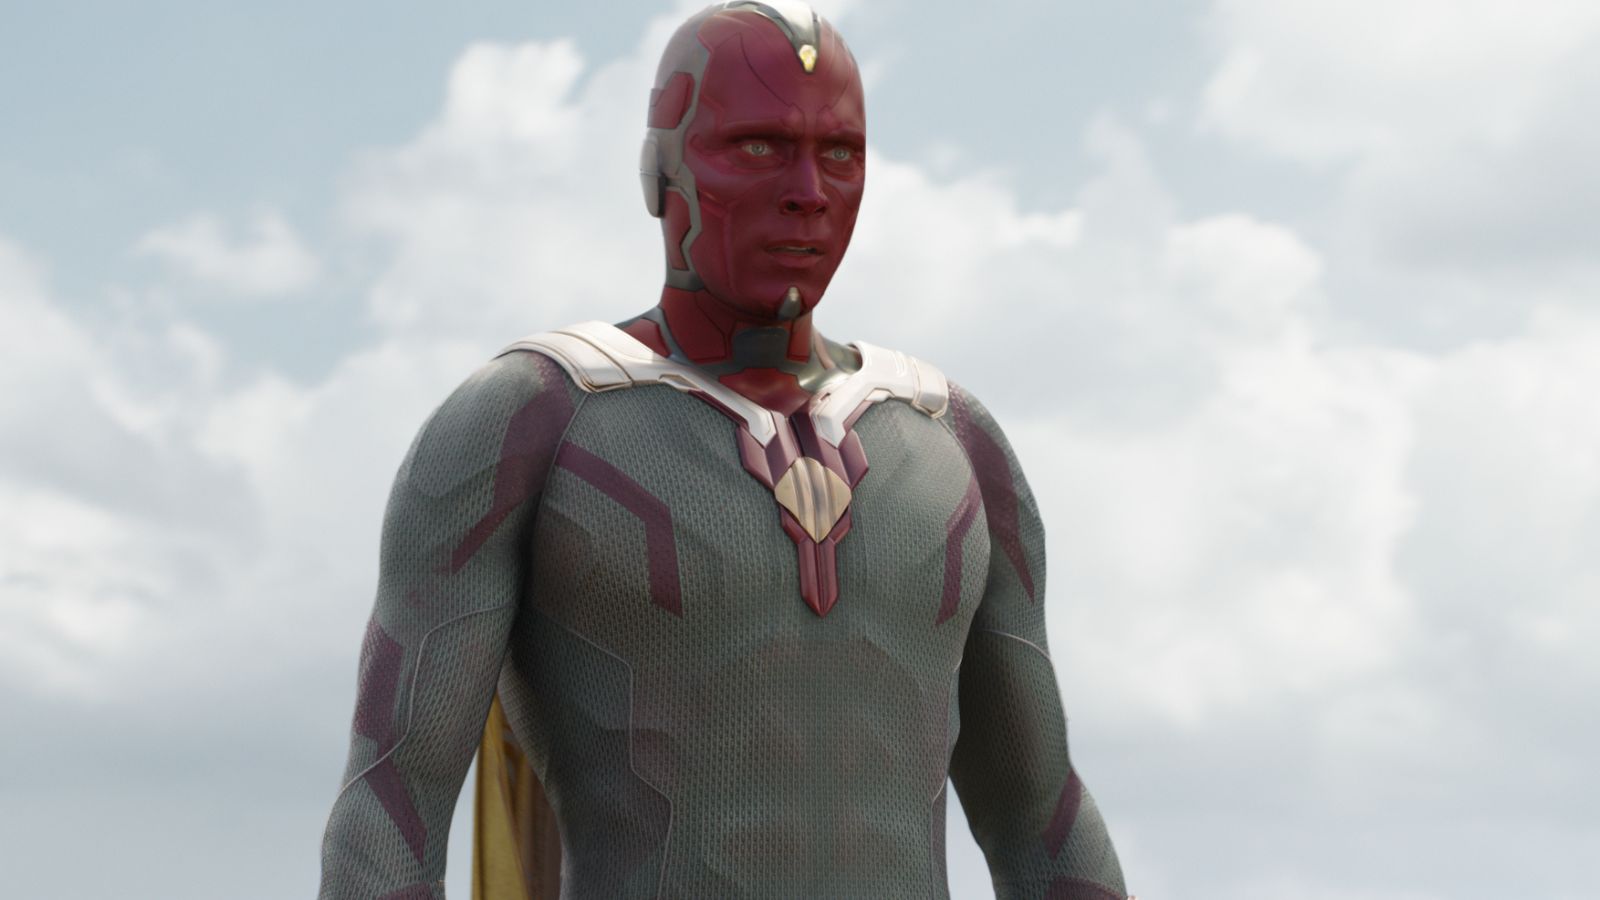 Fan theory says Vision was behind The Raft escape in 'Civil War'